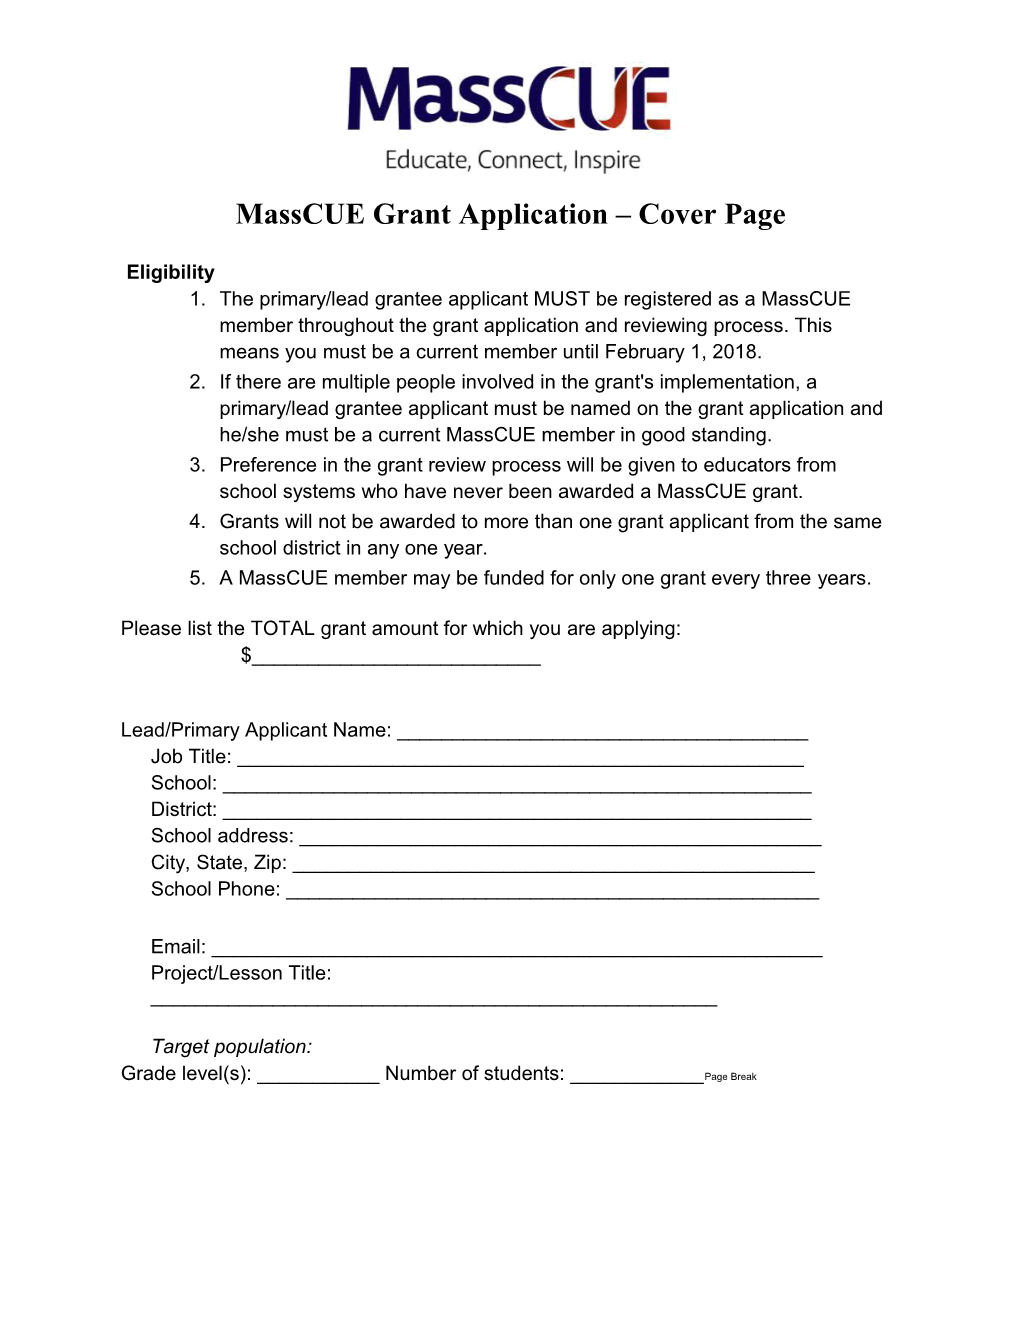 Masscue Grant Application Cover Page